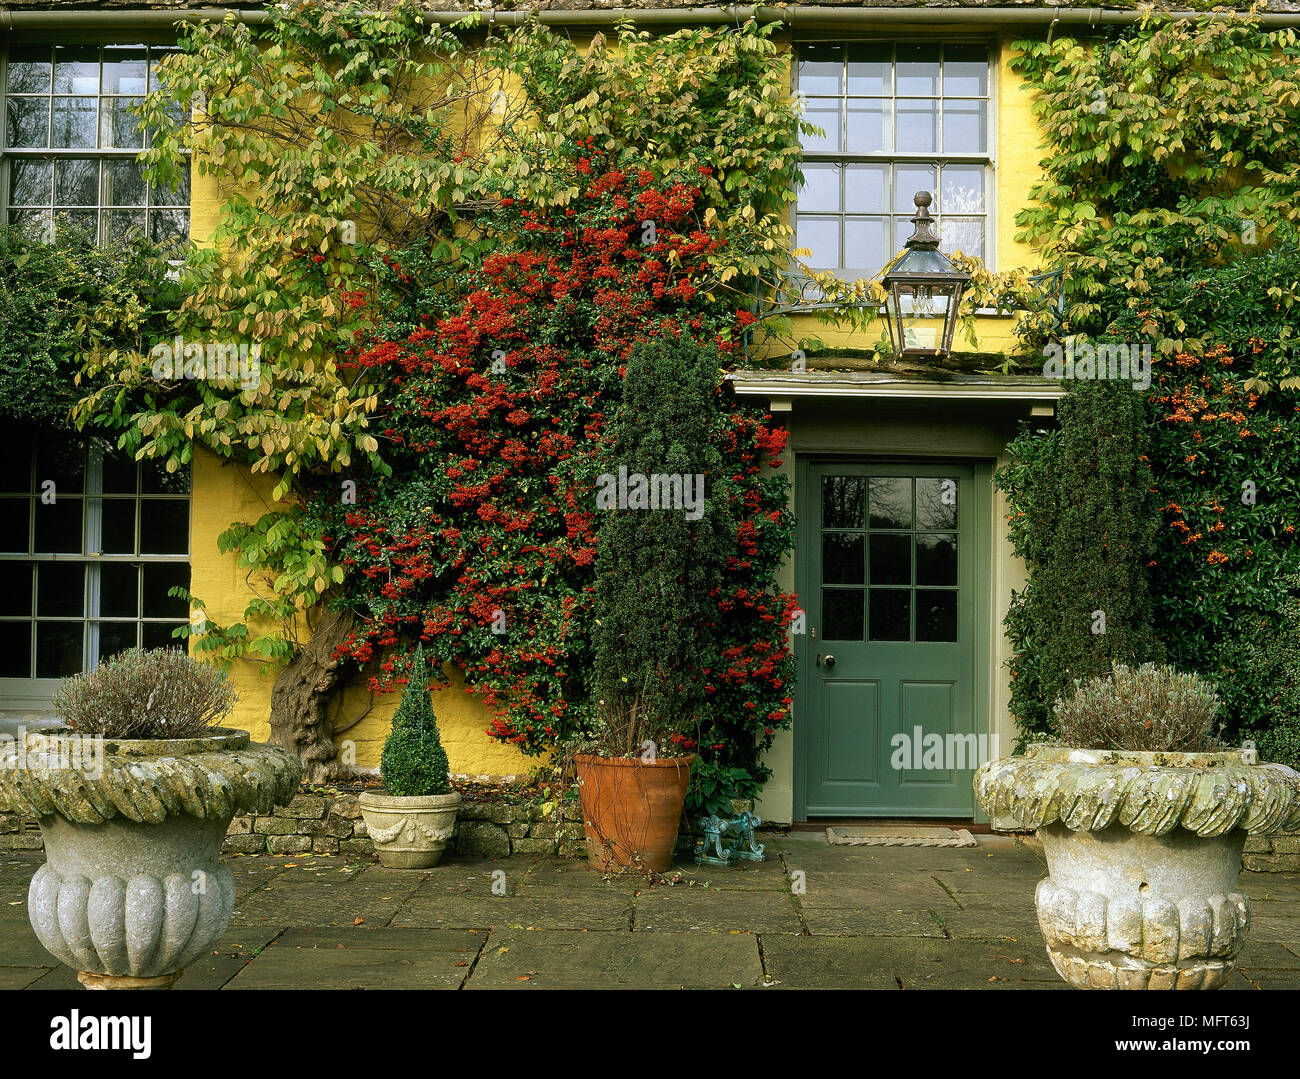 Exterior of yellow painted villa with red flowering climbing plant, Stock Photo